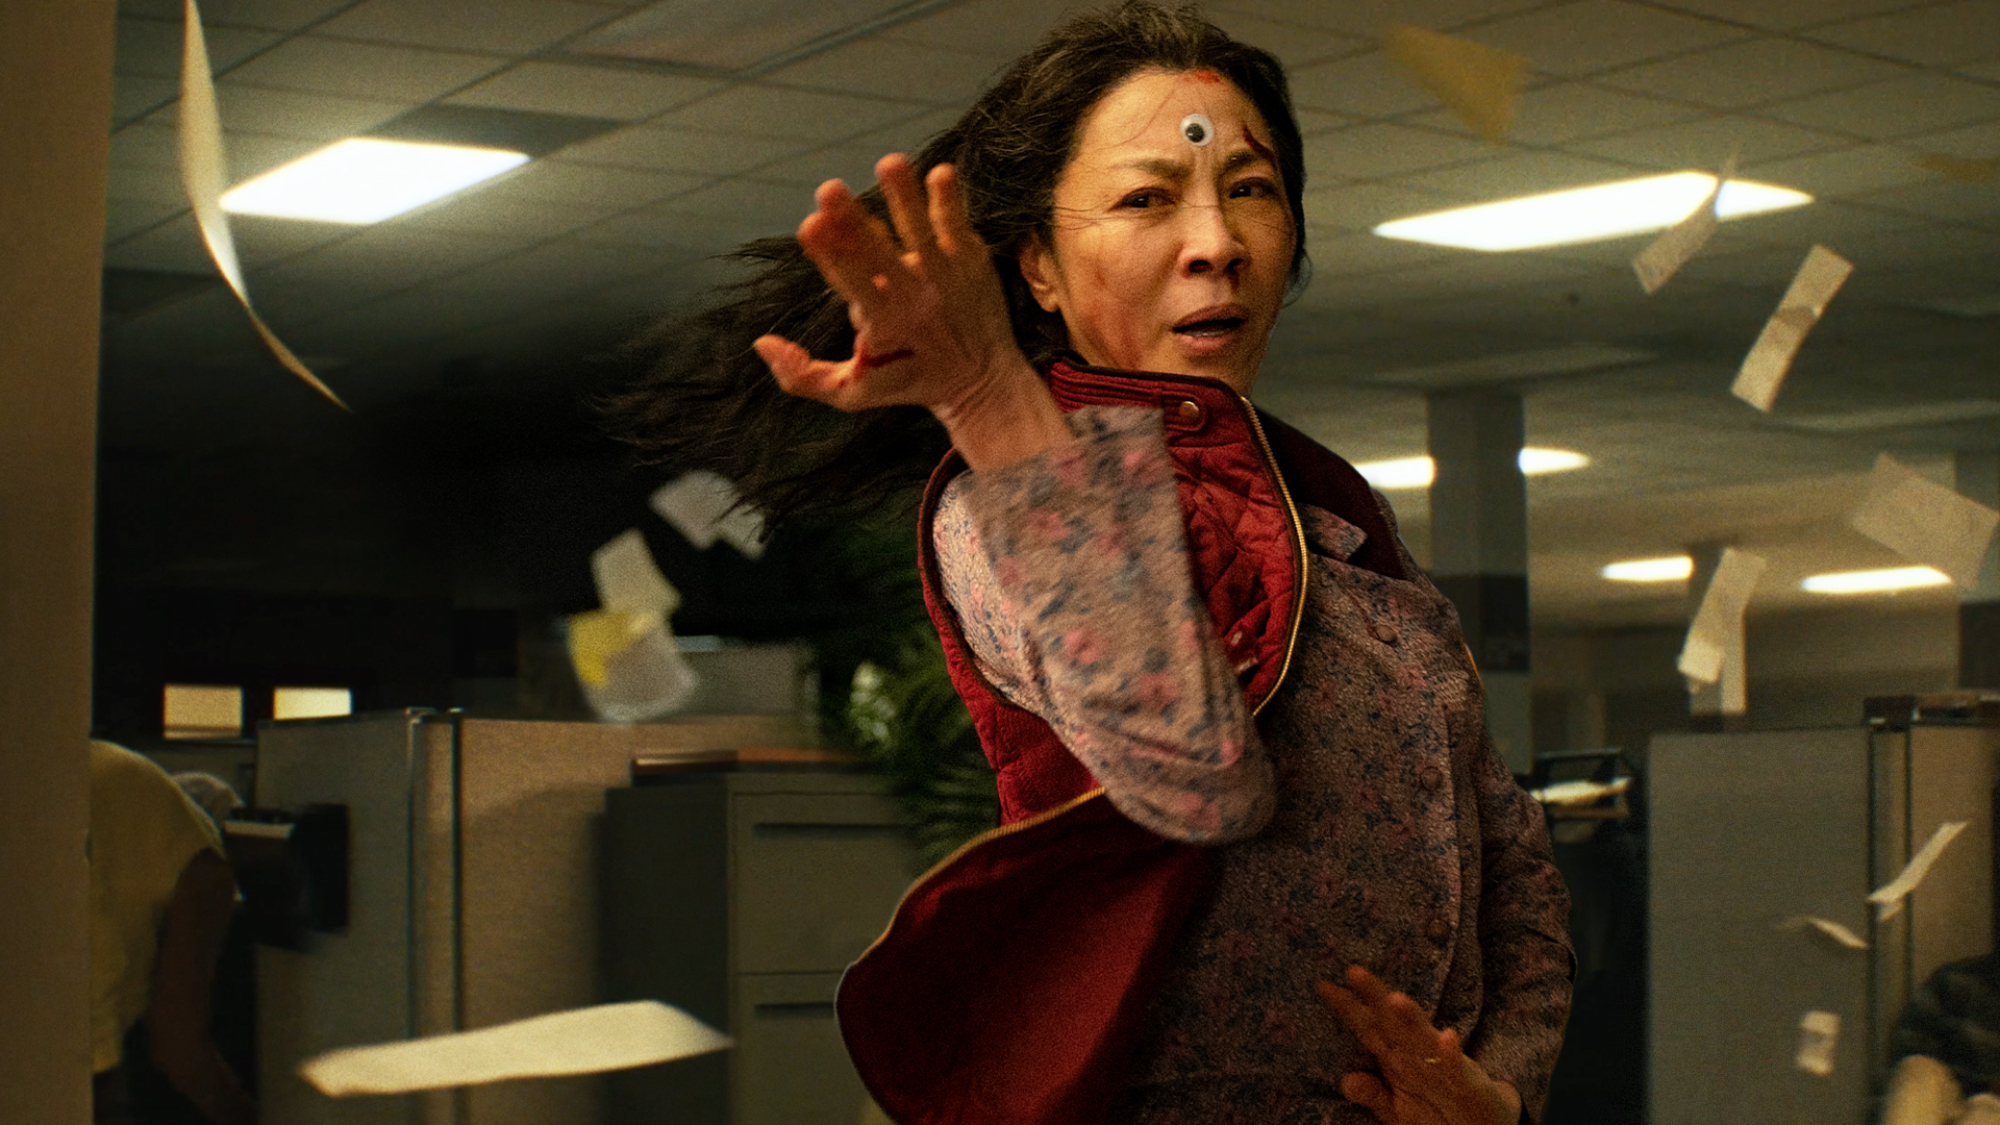 'Everything, Everywhere All at Once' Michelle Yeoh as Evelyn Wang in a fighting pose with a googly eye attached to her forehead and papers flying around